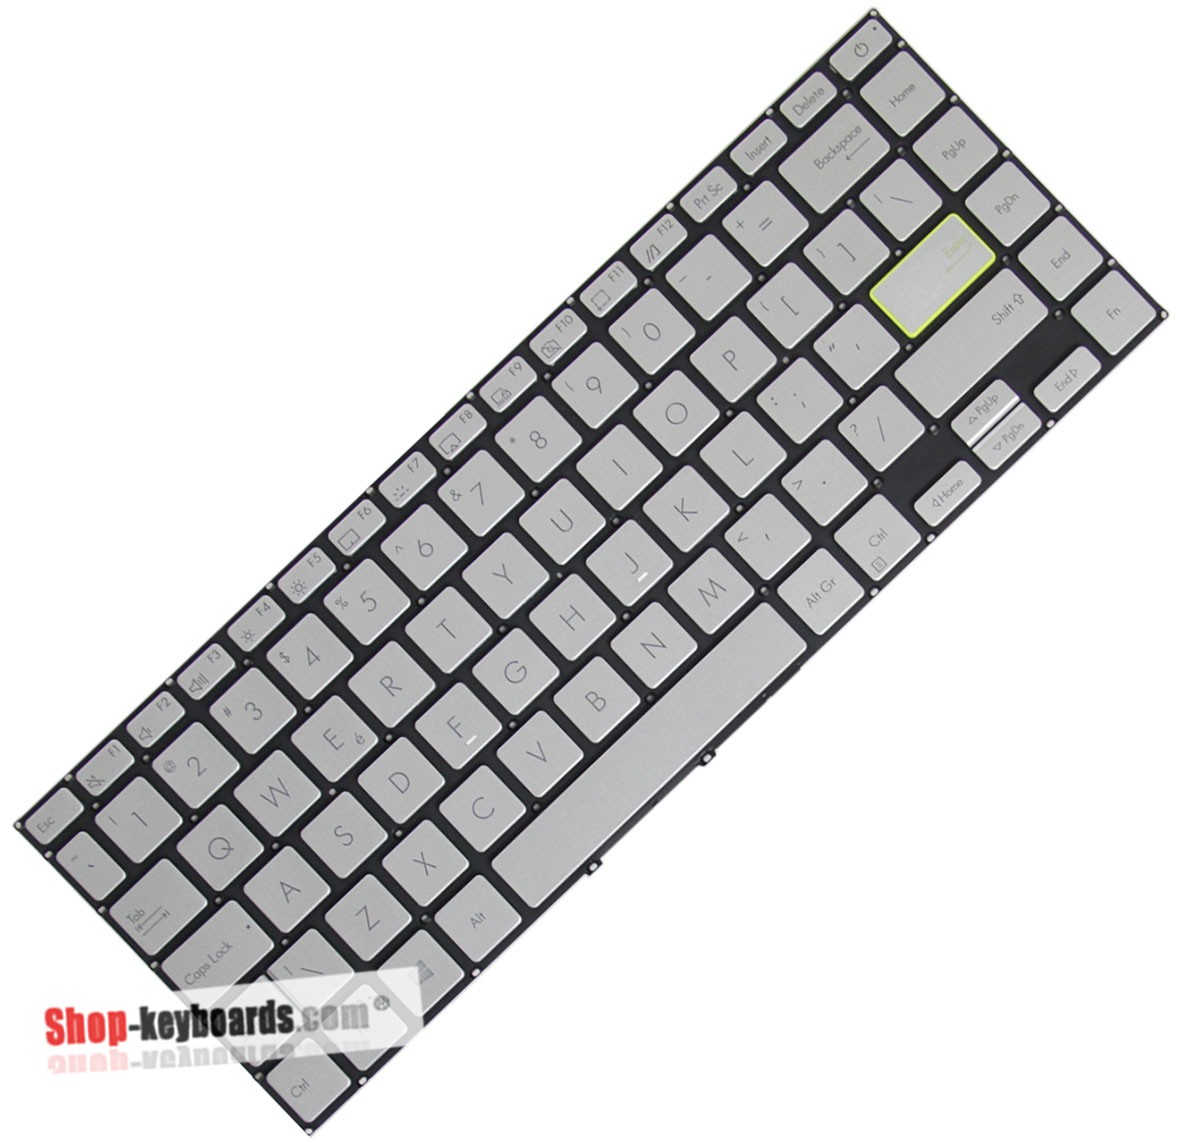 Asus 0KNB0-212PIT00 Keyboard replacement